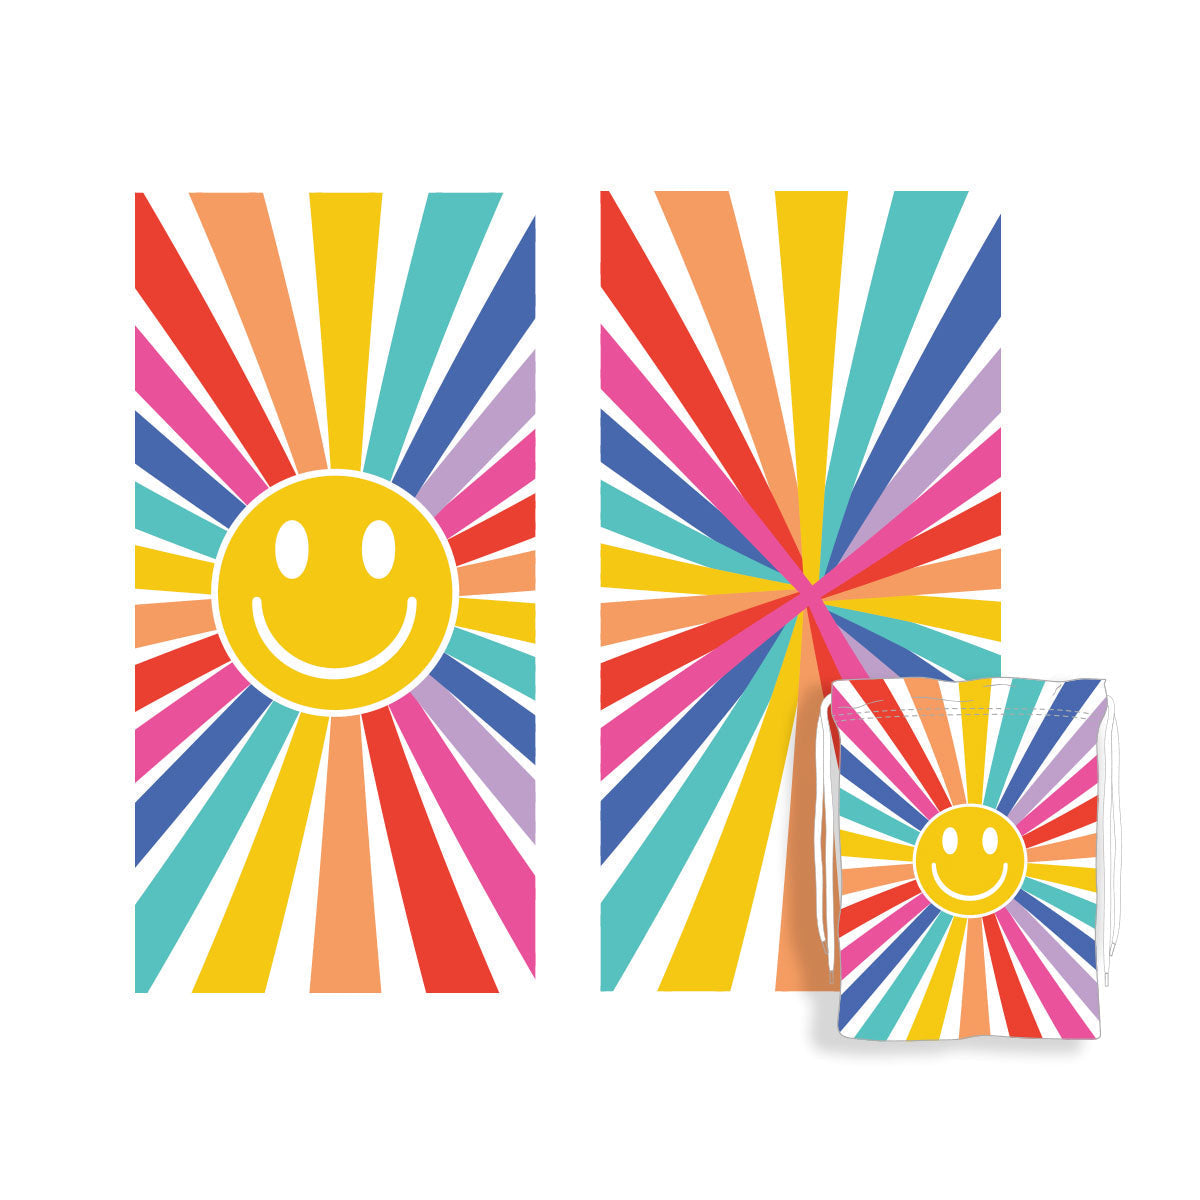 Sunshine Happy Face Beach Towel is perfect for poolside fun